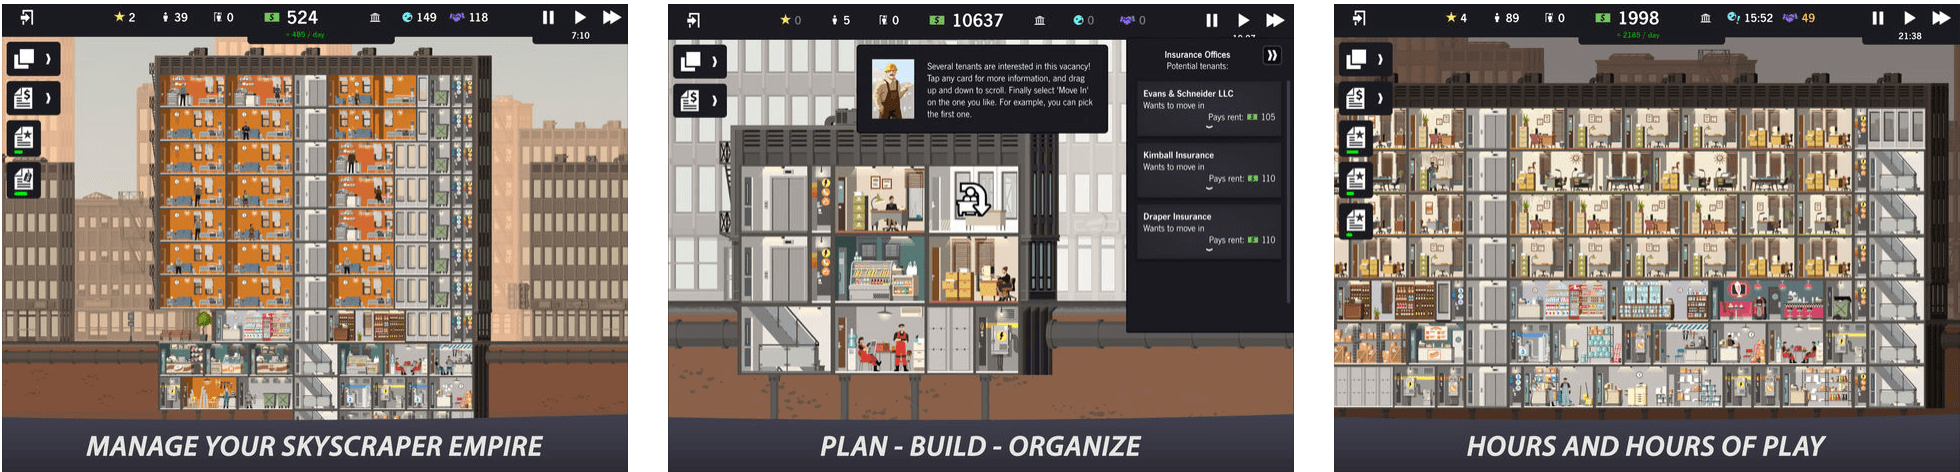 App Store specials of the day: Project Highrise, Shepard Fairey AR - Damaged, Airmail 3 and more!